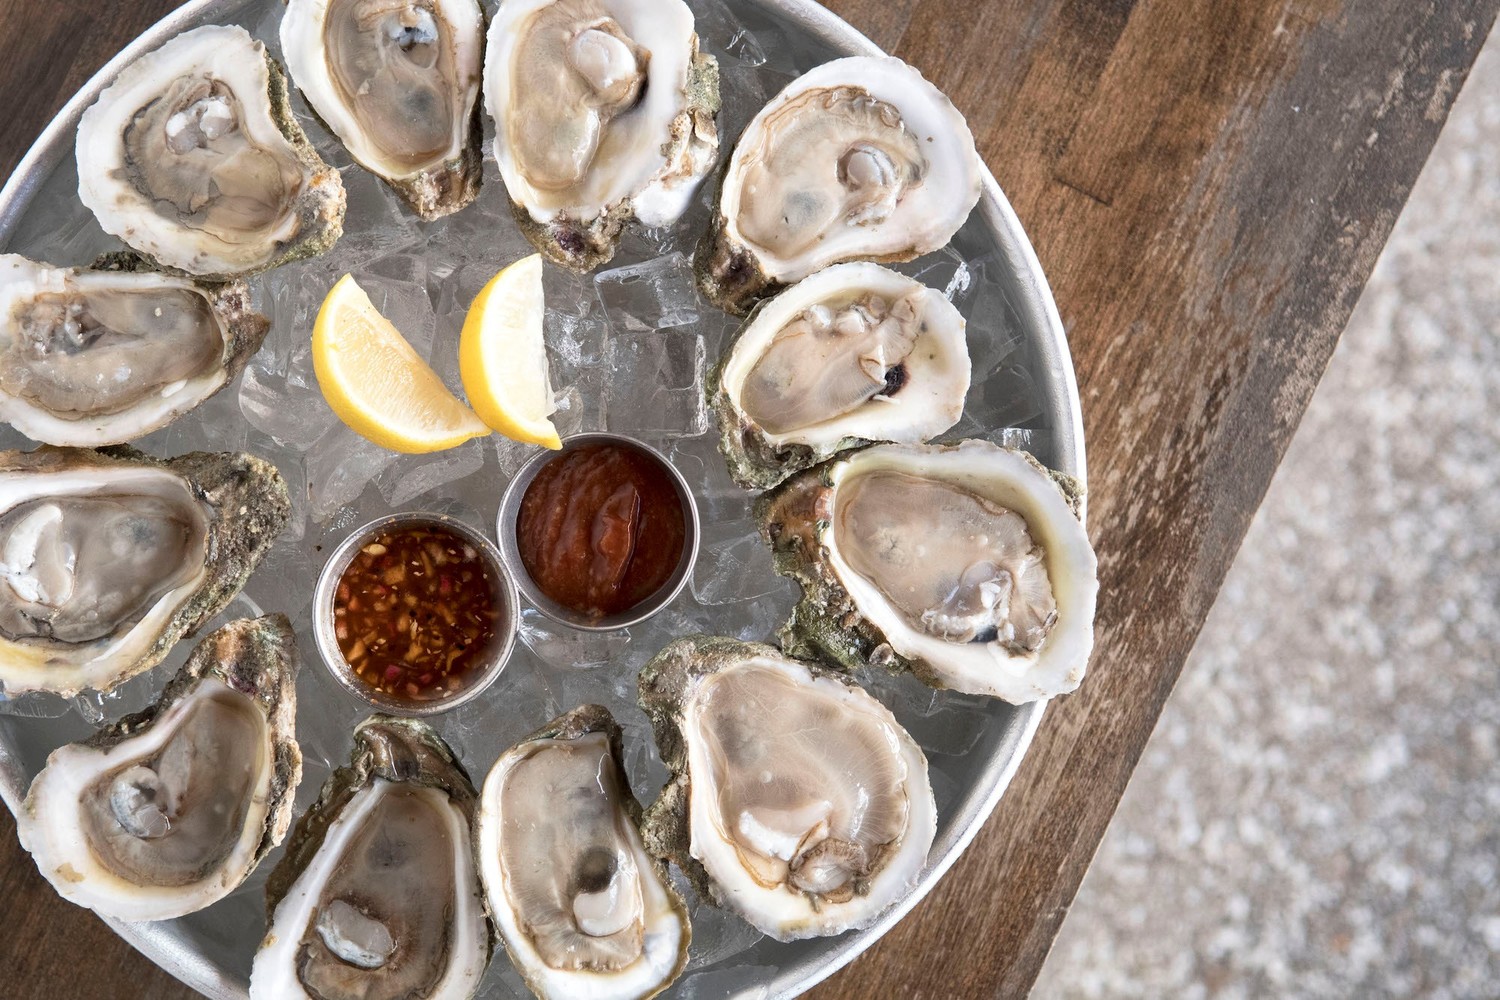 St. Augustine Seafood Company offers up fresh oysters from the Gulf Coast and other locales.